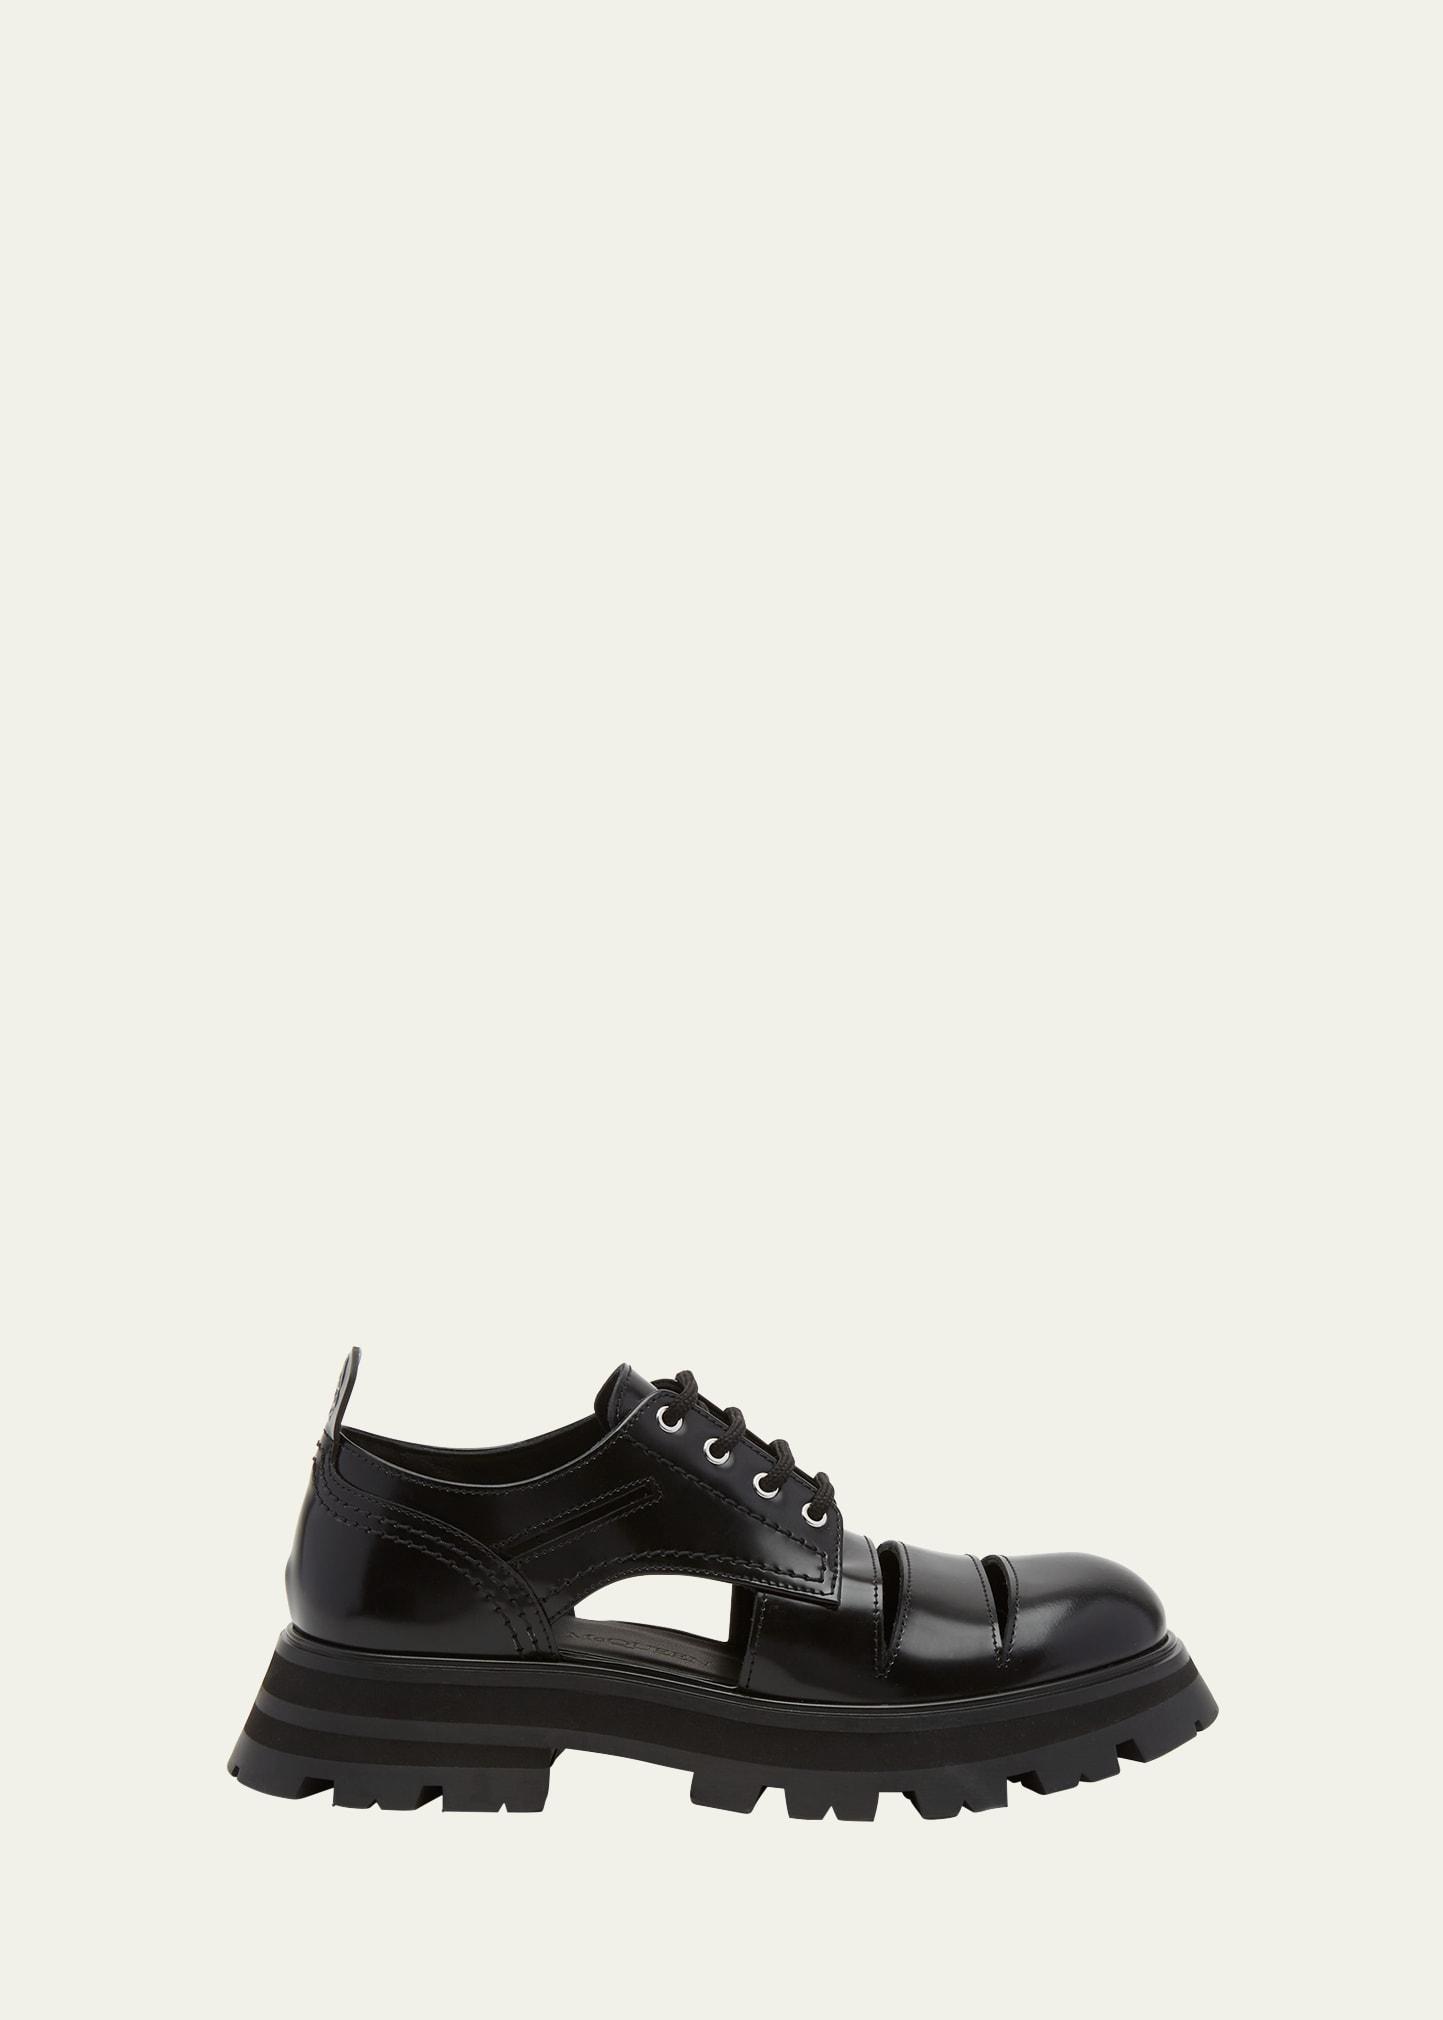 Alexander McQueen The Wander Cutout Leather Loafers in Black | Lyst